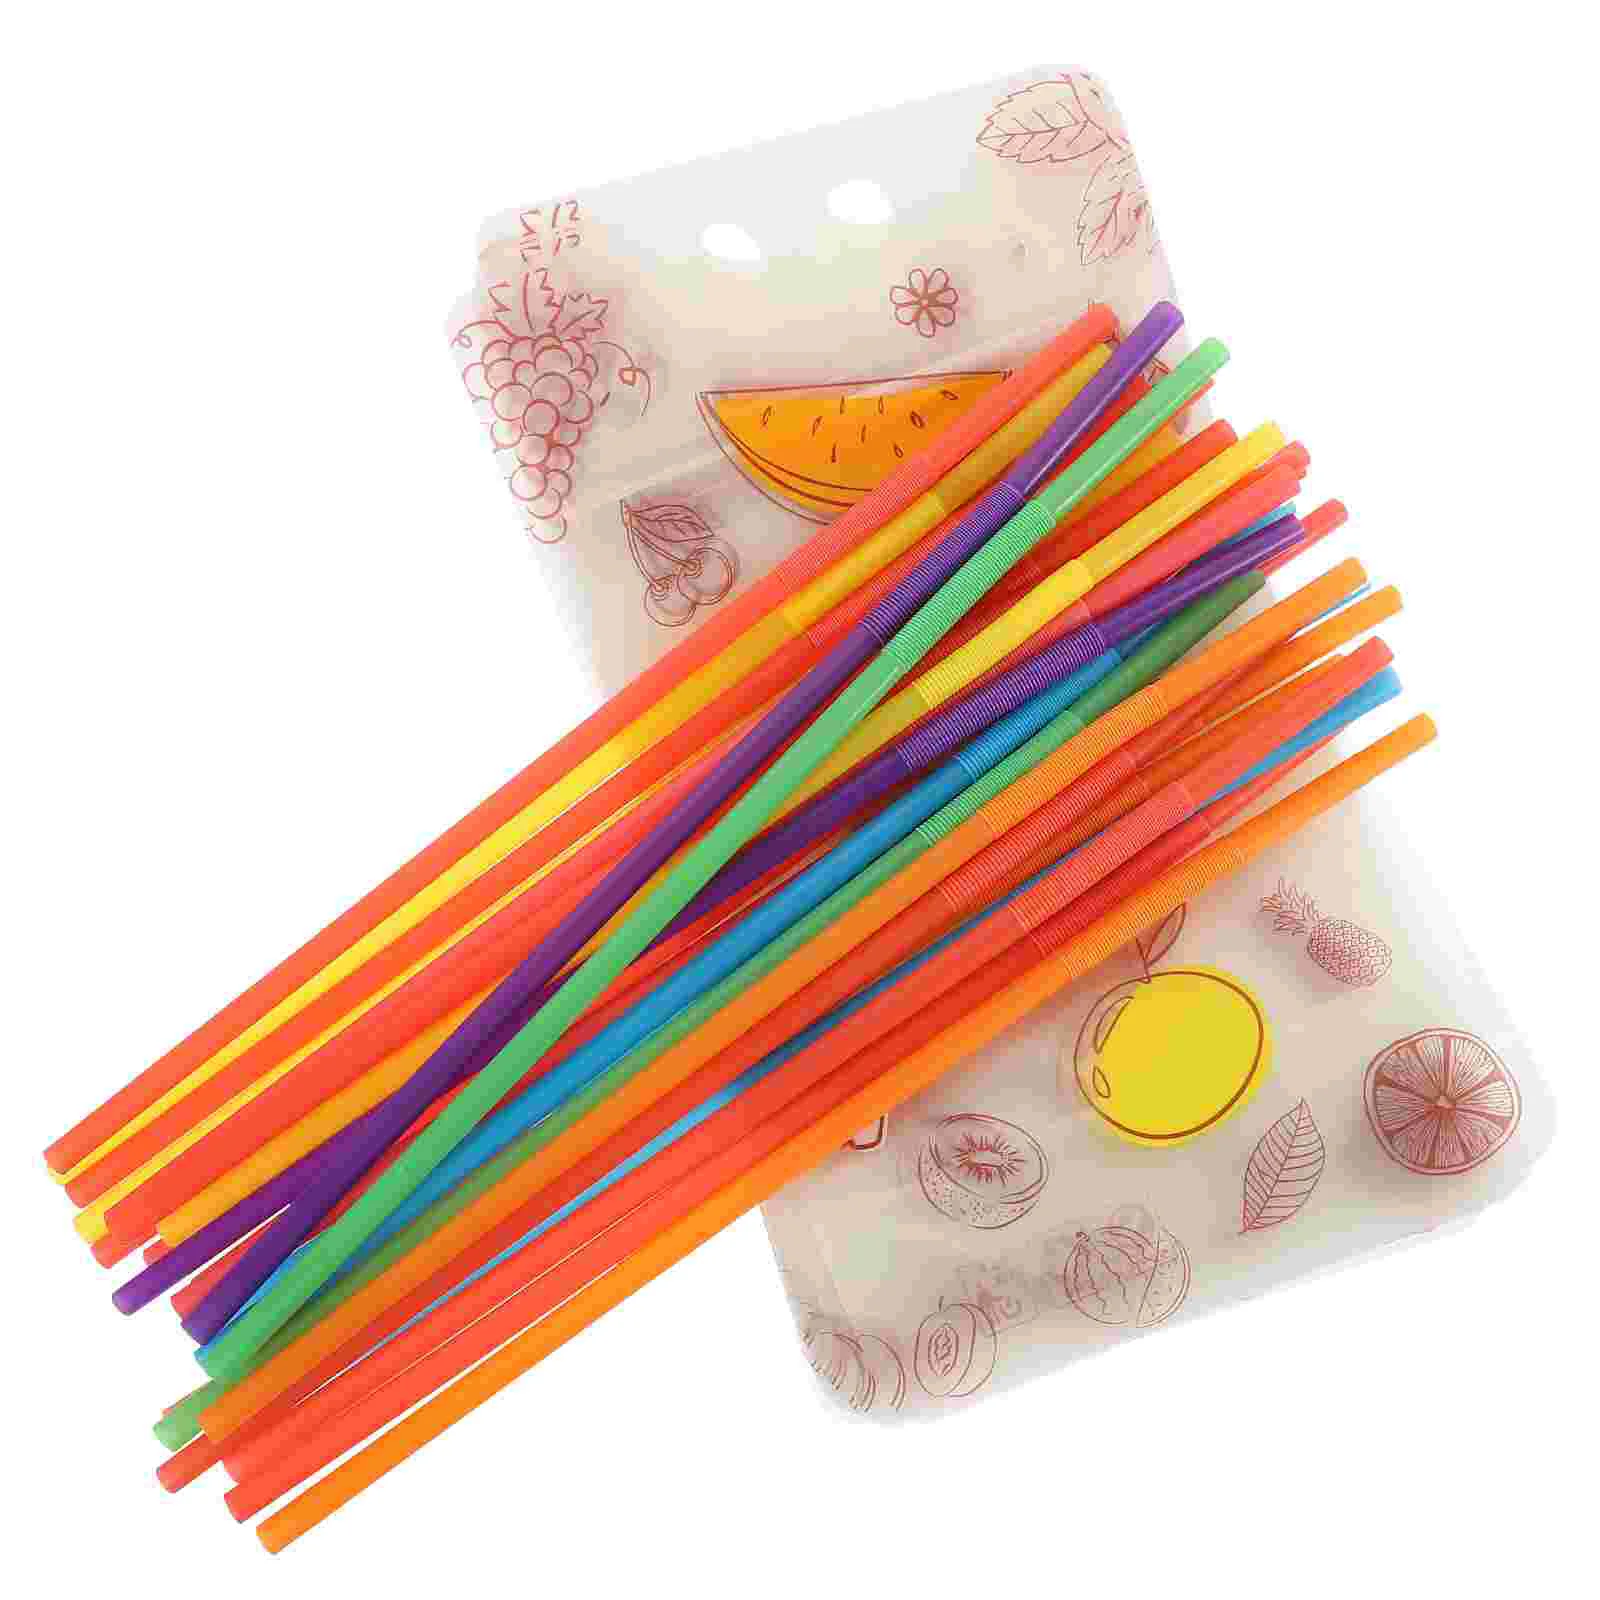 

25 Pcs Straws Juice Containers Yogurt Pouches Drinking Alcohol Water Bag Adults Smoothie Drinks